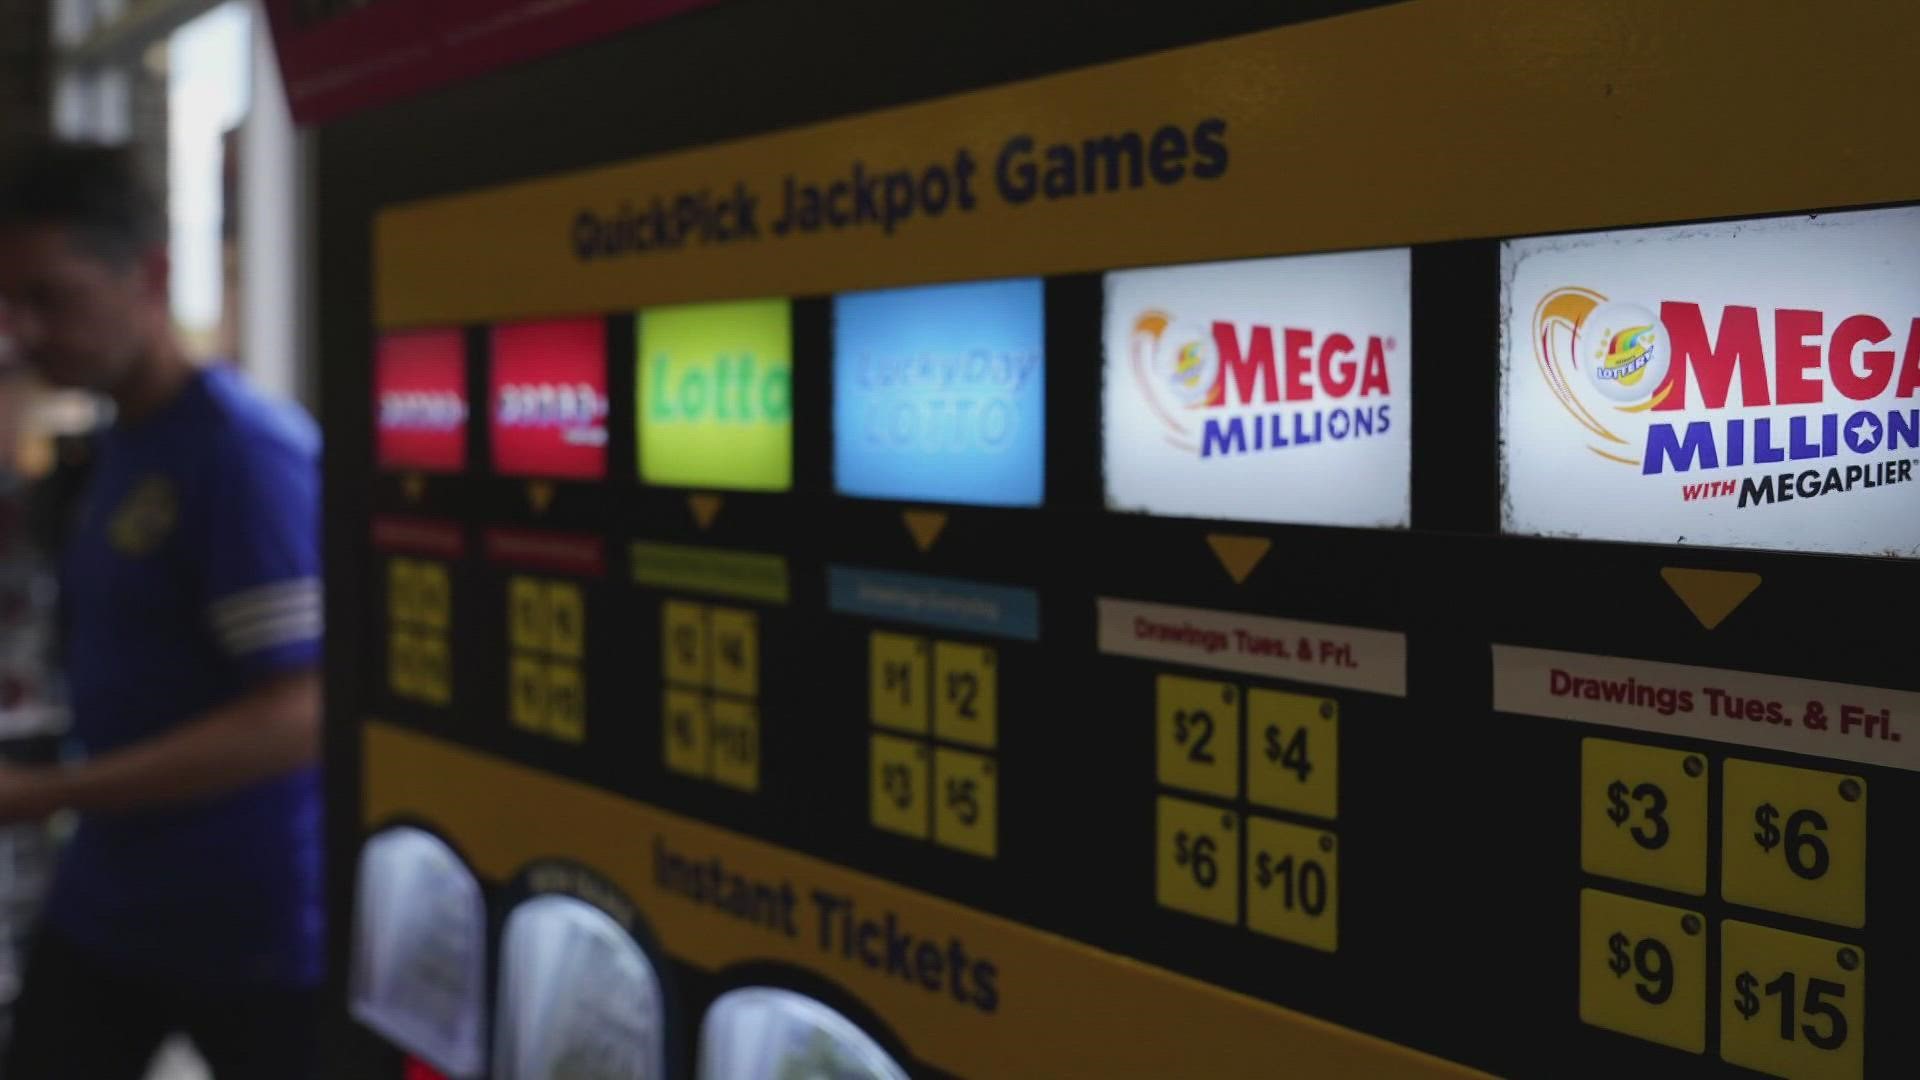 The Mega Millions jackpot is growing and the excitement is building. Jen Wahl has more about the odds of winning and Arizona connections to previous winners.